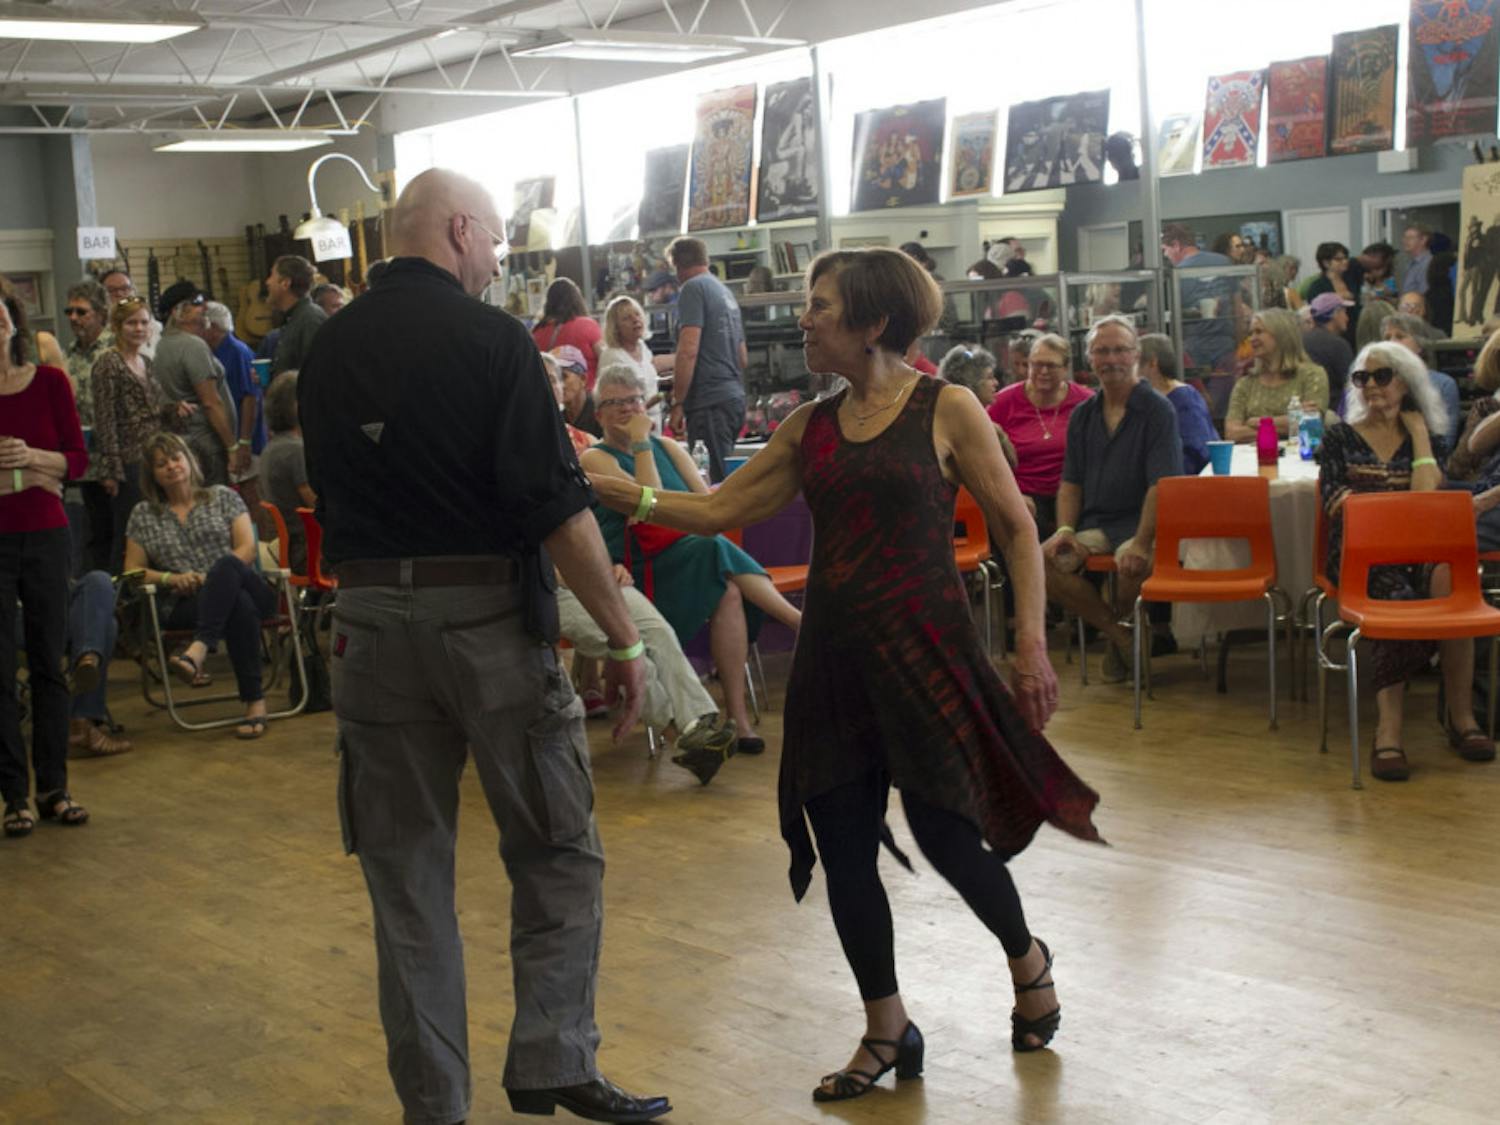 Carol Perrine (far left) watches as two of her friends dance at the Carolpalooza&nbsp;benefit concert.
&nbsp;